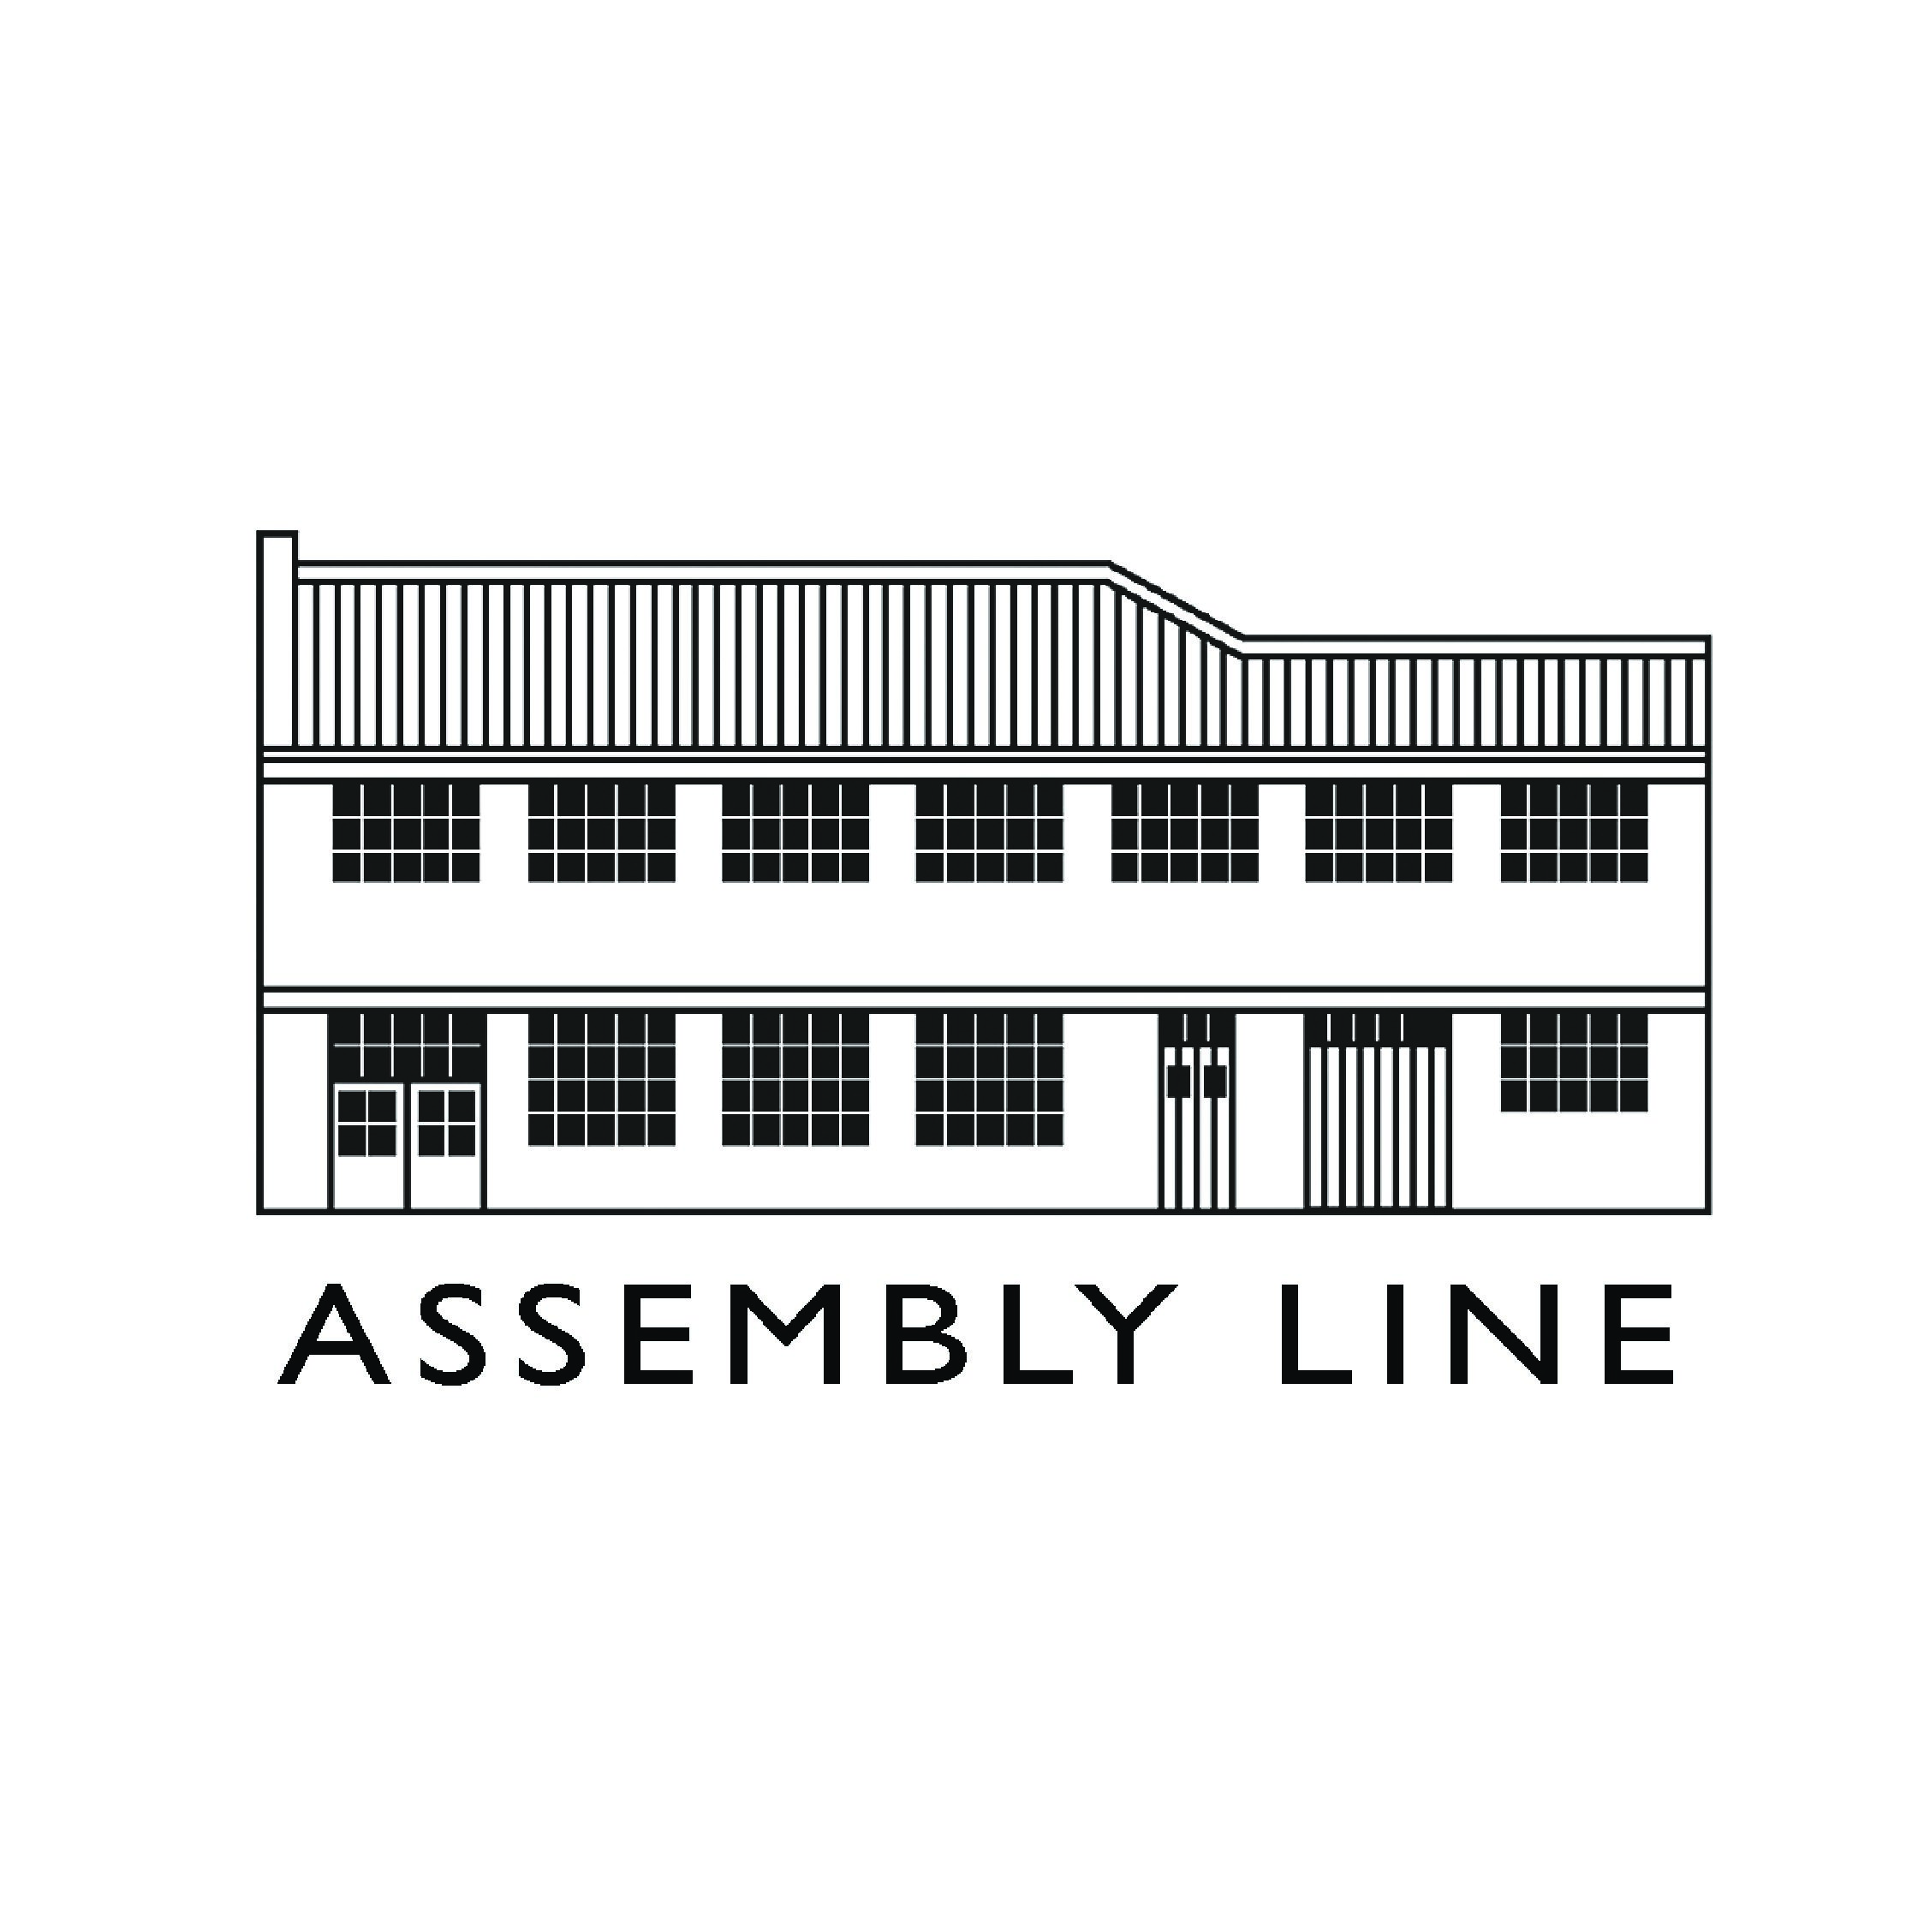 Read more about Assembly Line...